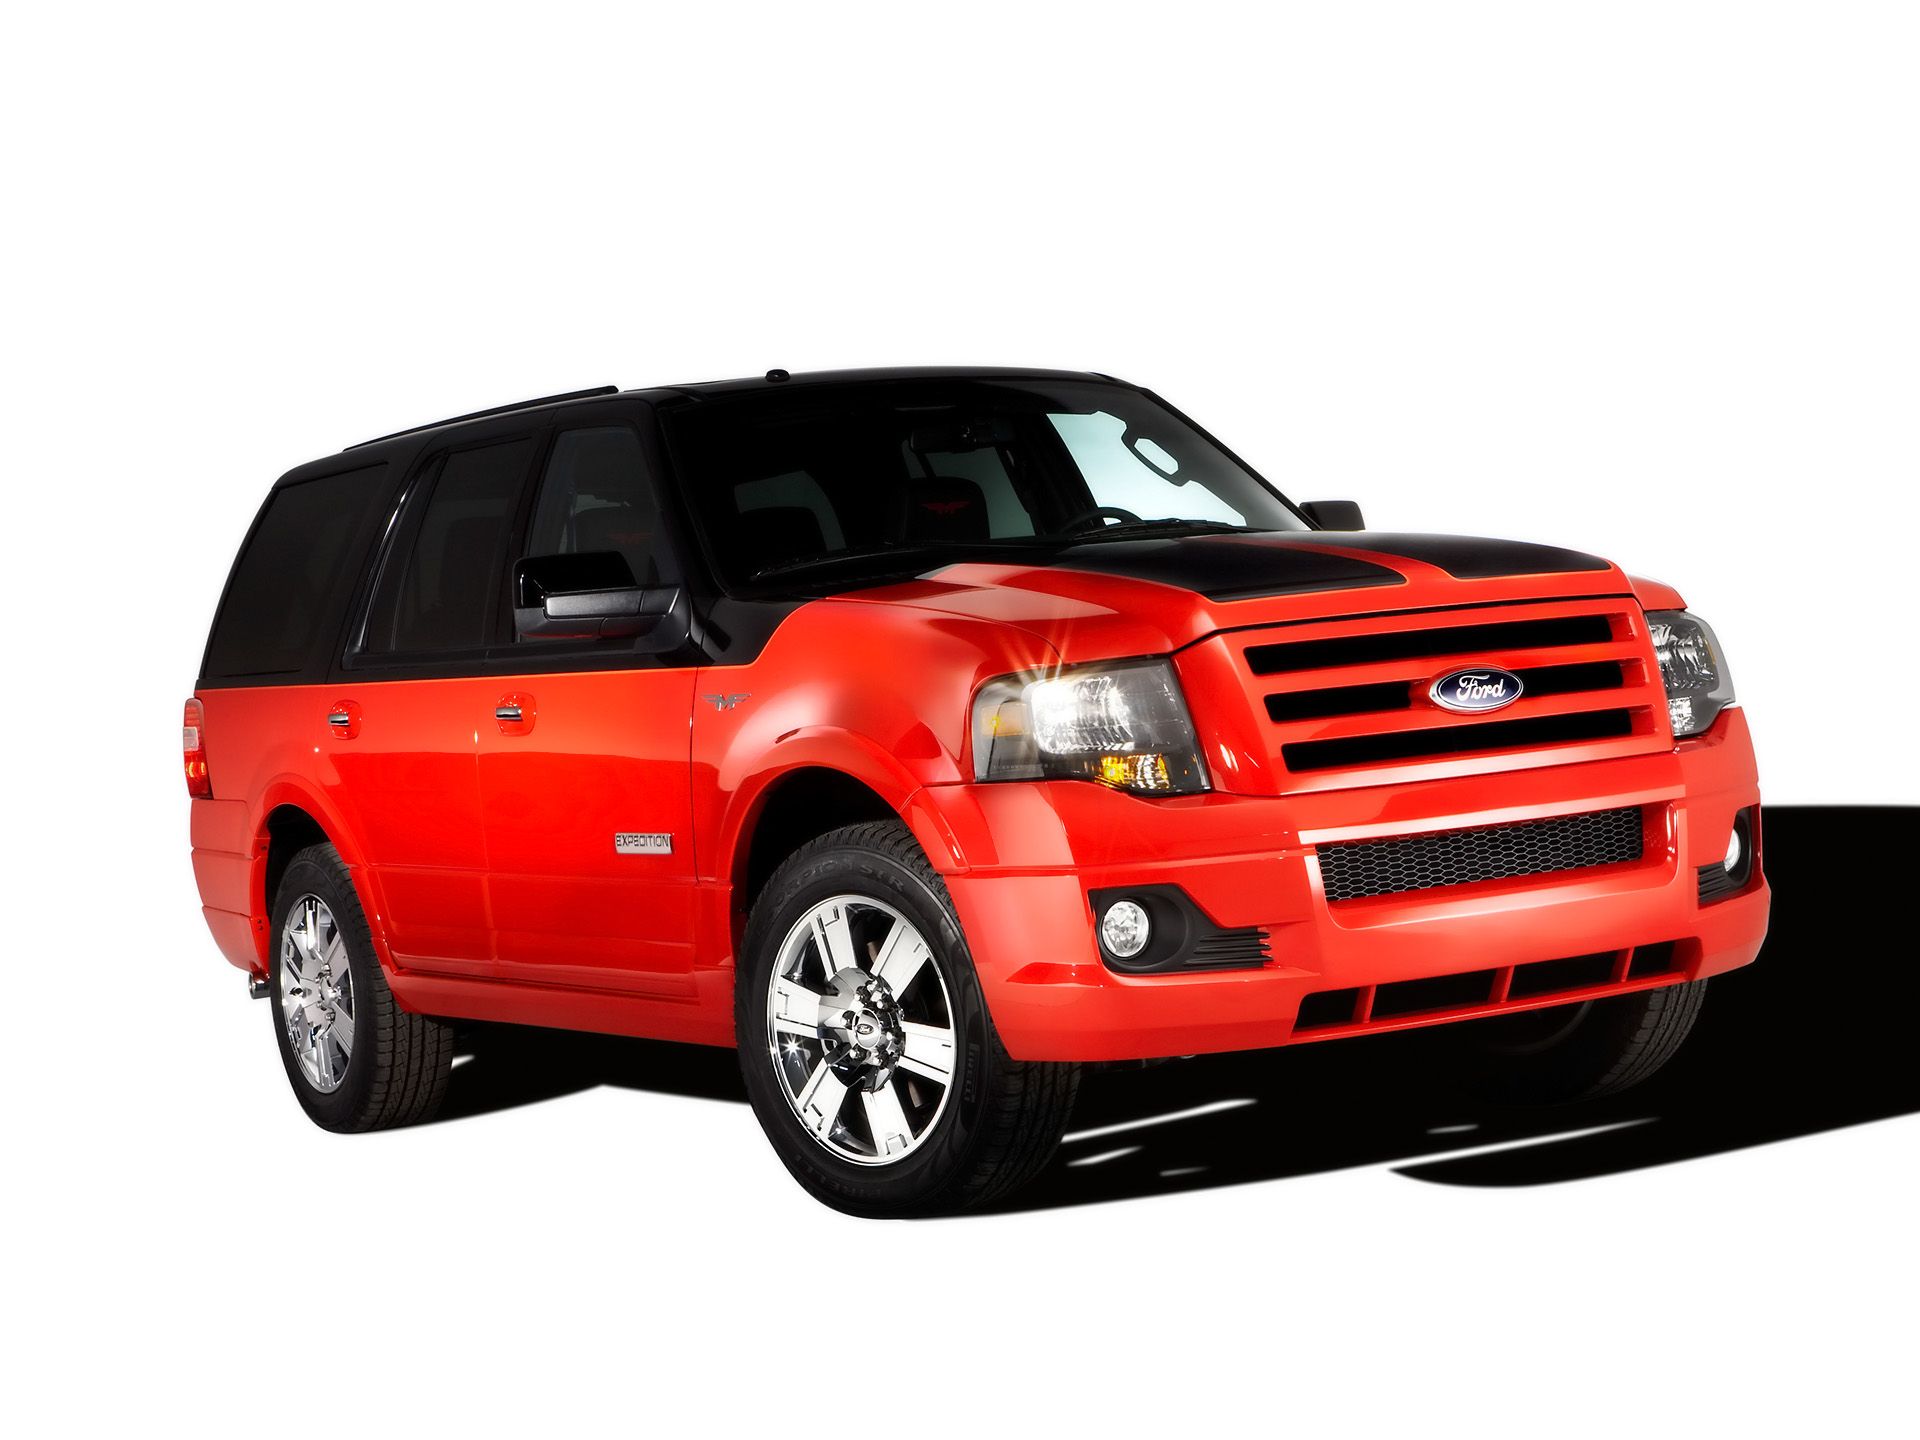 Ford Expedition wallpaper. Ford .wallpapertock.net